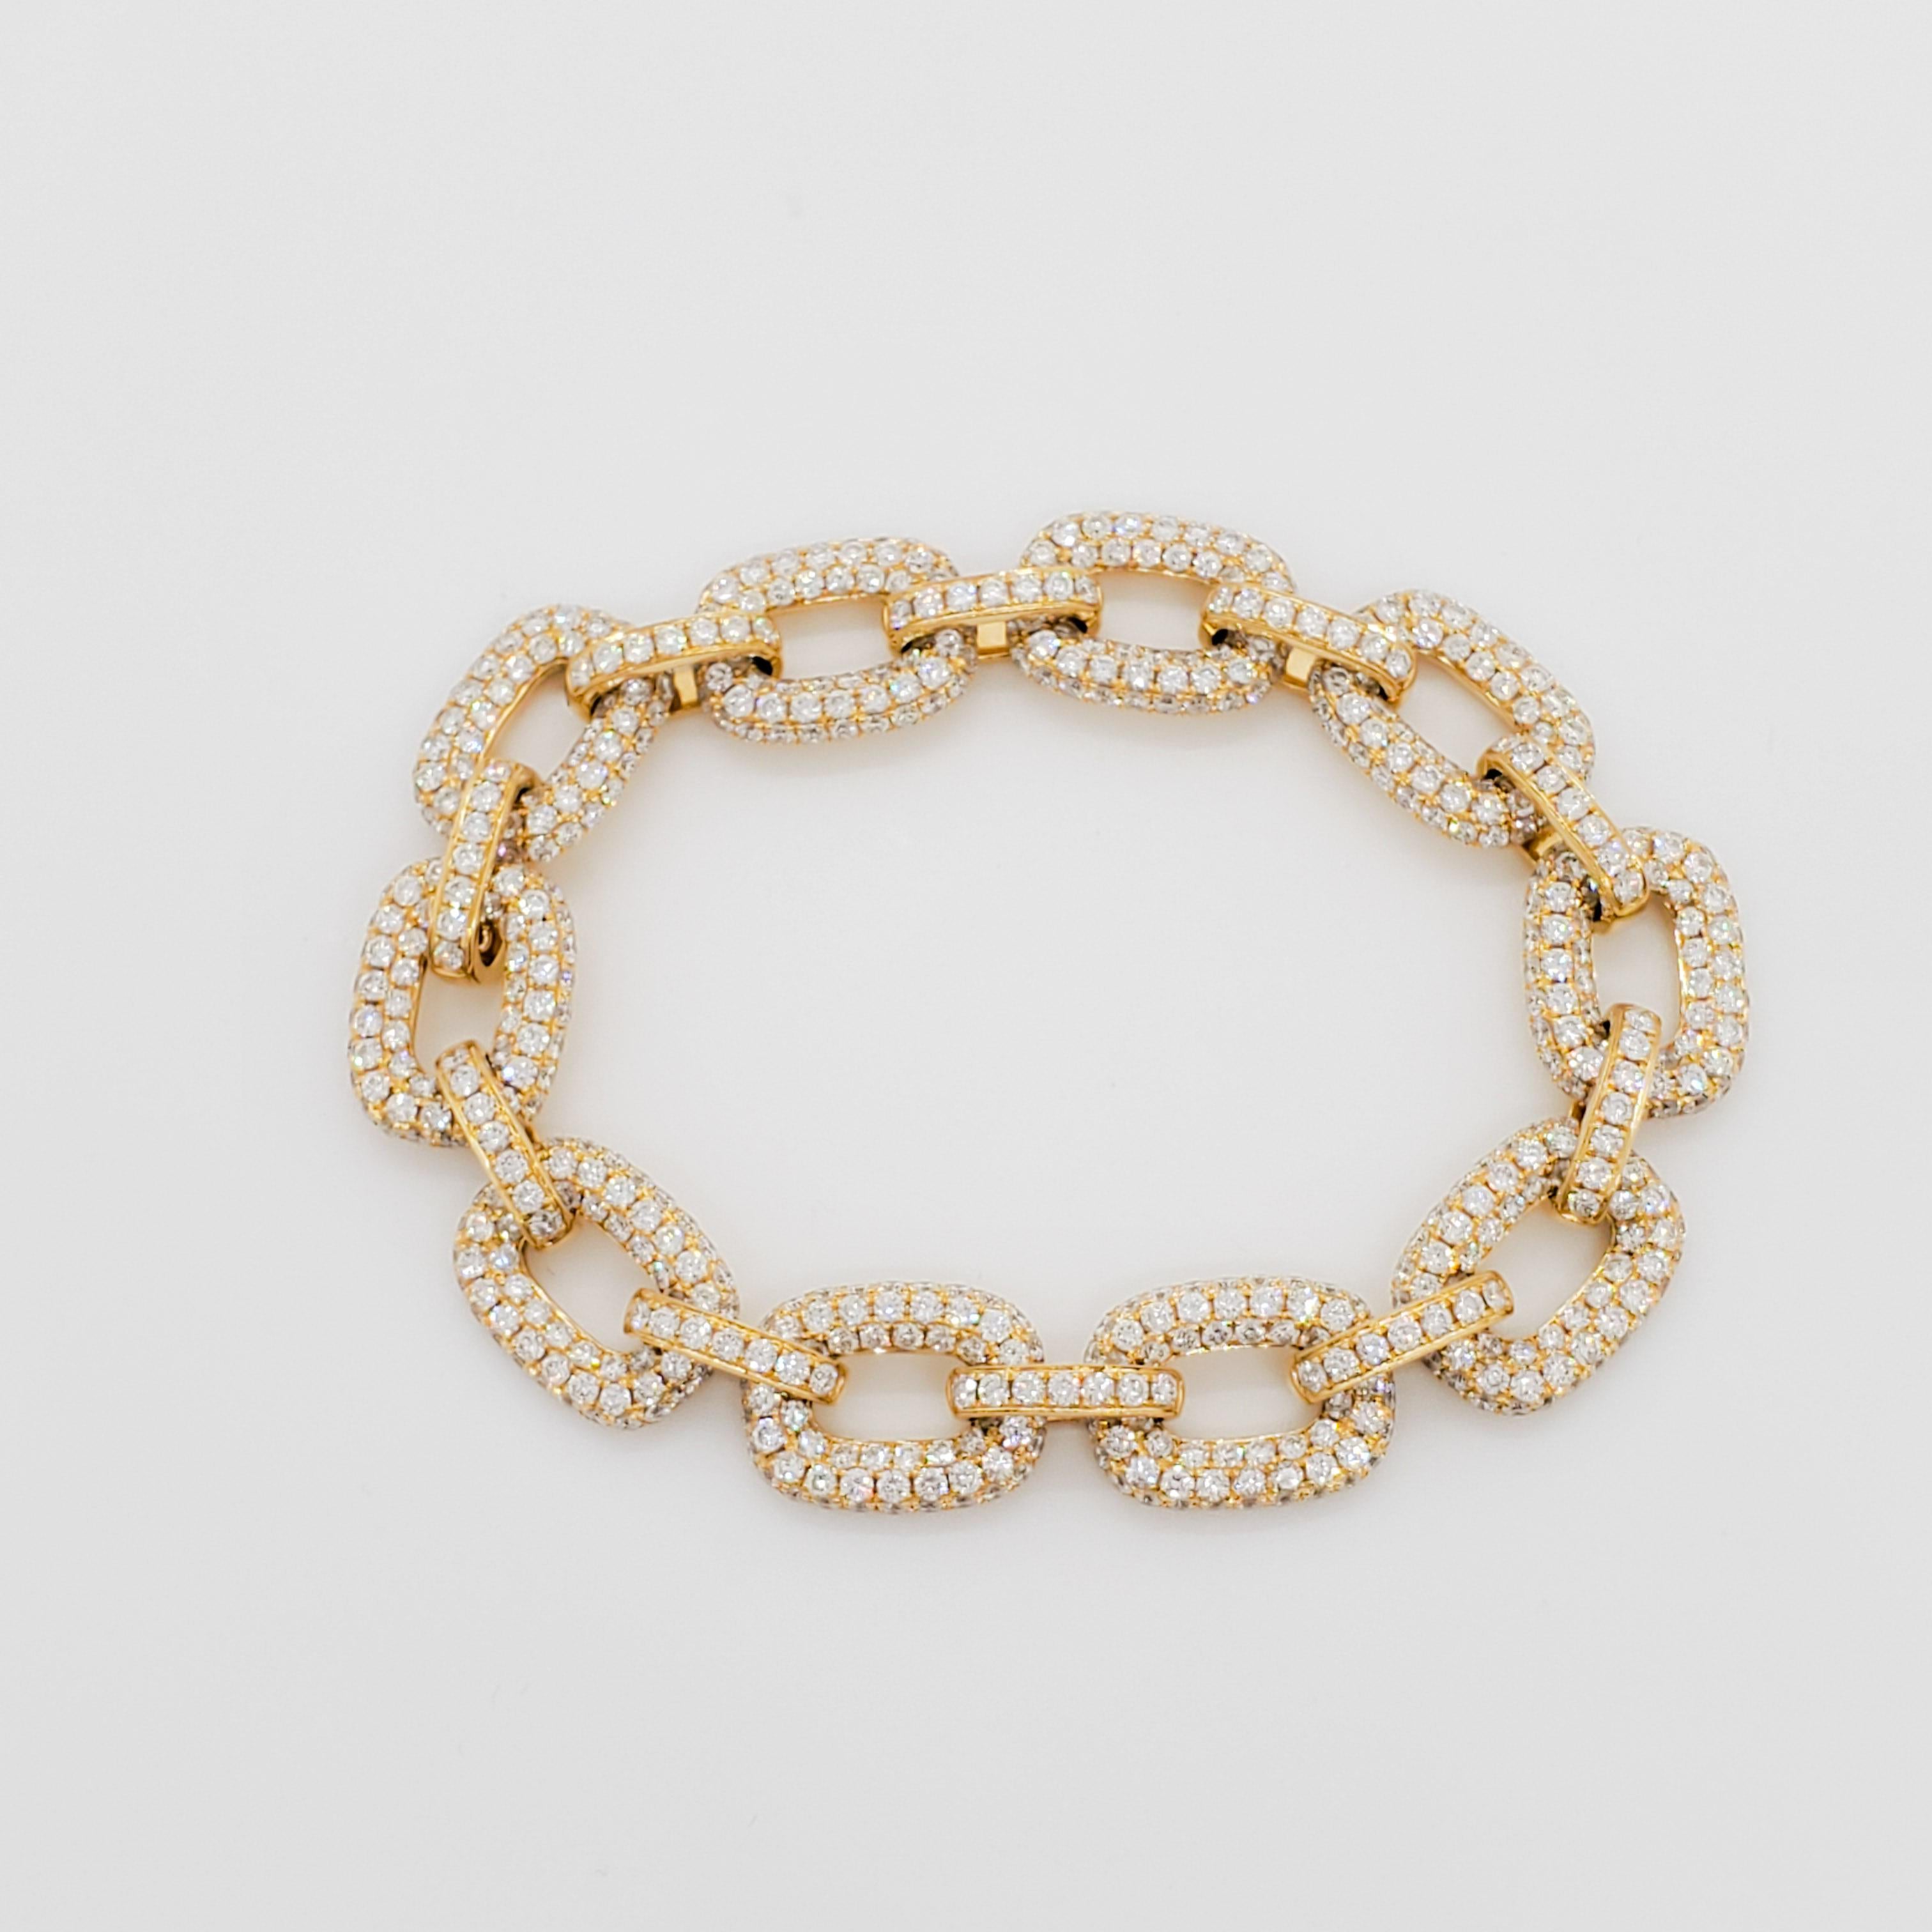 Gorgeous and trendy 11.50 ct. white diamond pave link bracelet.  Handmade in 18k yellow gold.  Perfect for stacking and elegant enough to wear on it's own.  Length is 7